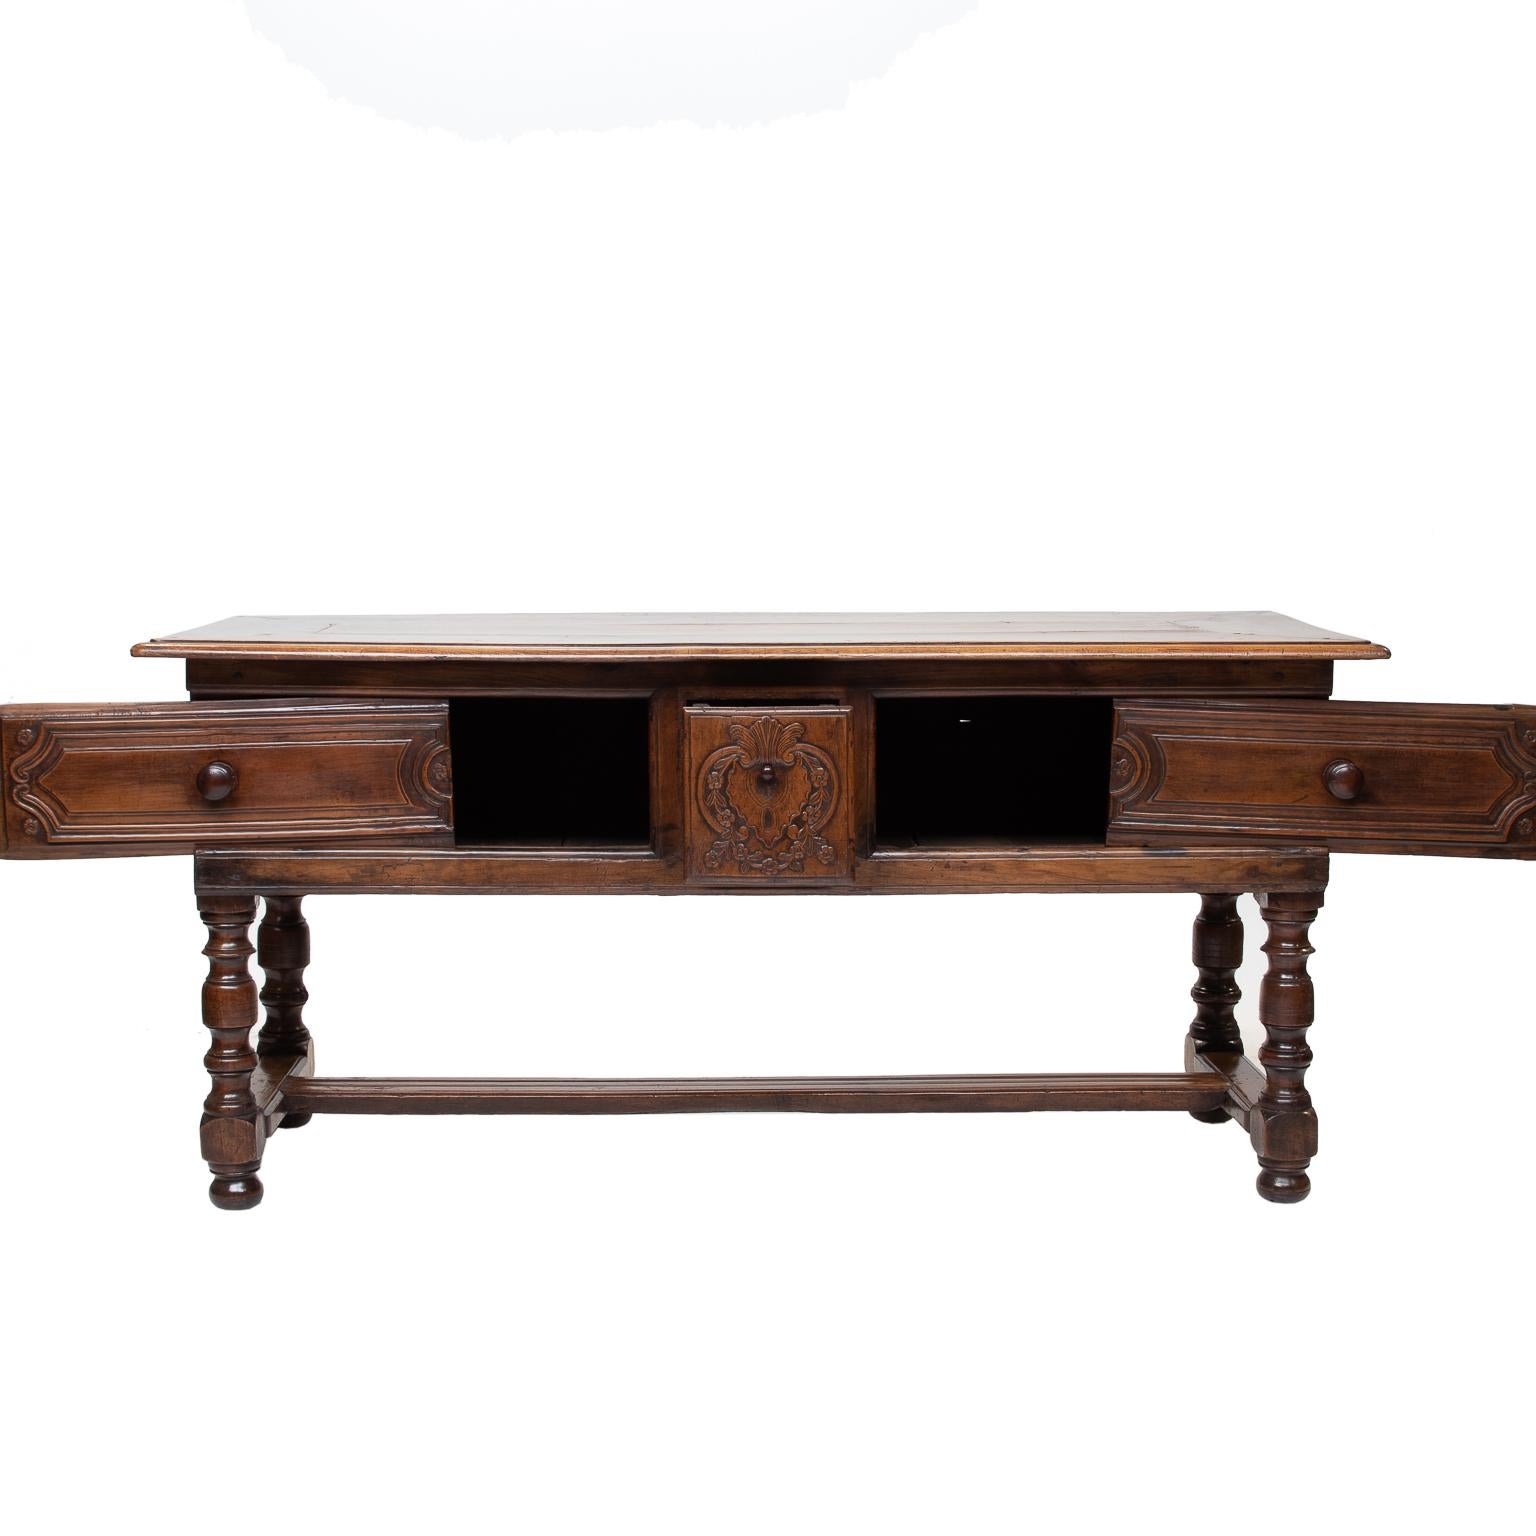 18th century Breton cherrywood dressing table with sliding front surrounding a center drawer. Turned legs with an H-stretcher. Very nice quality table. Finished on all sides. Great for a console, sofa table, or float in a room.